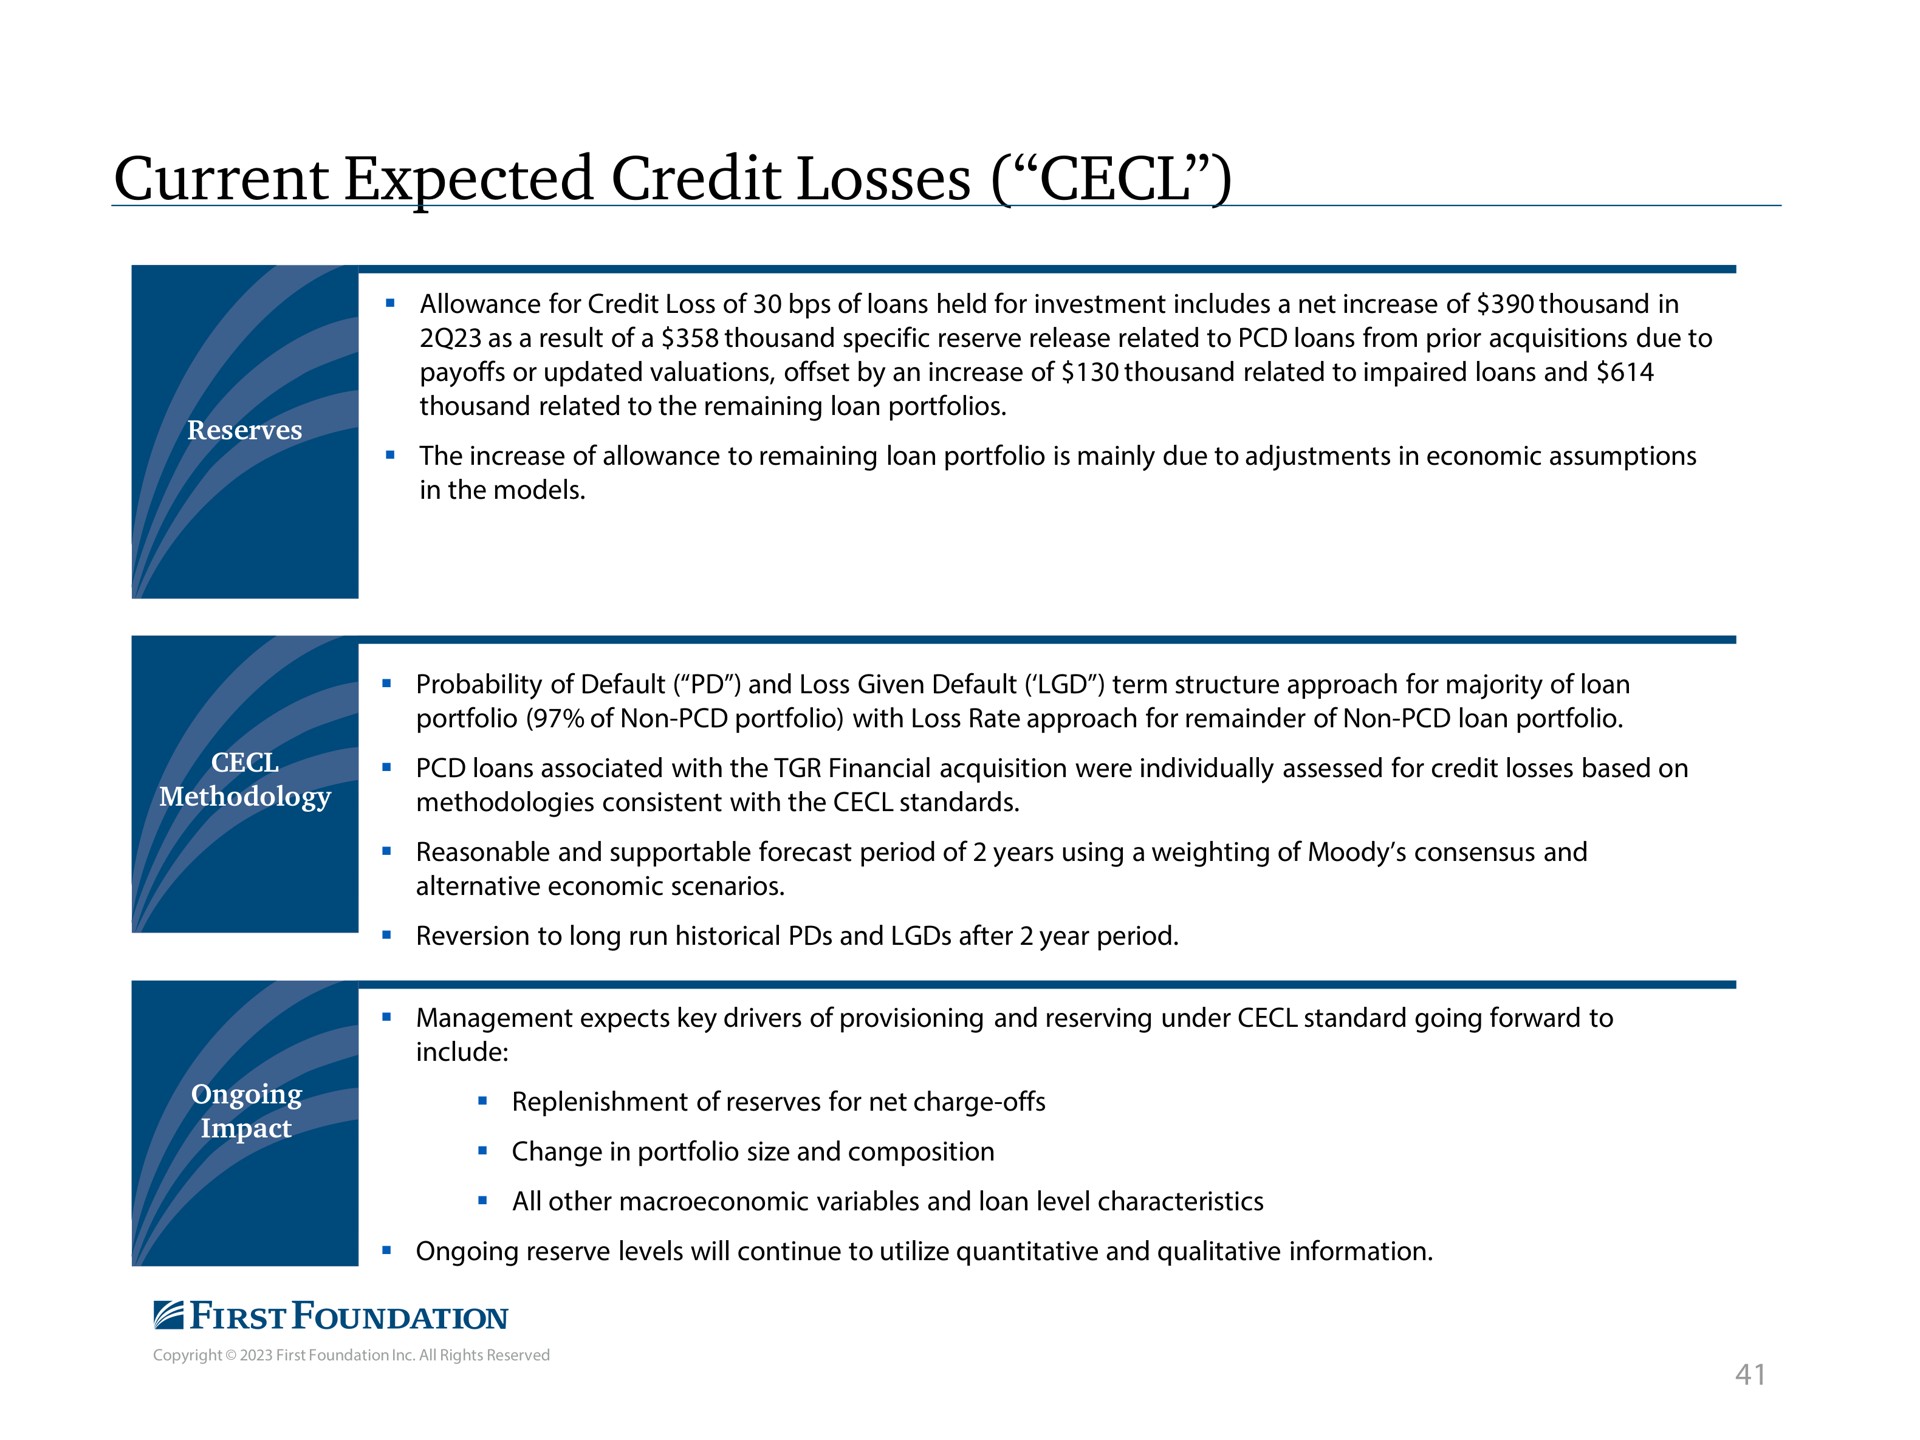 current expected credit losses | First Foundation